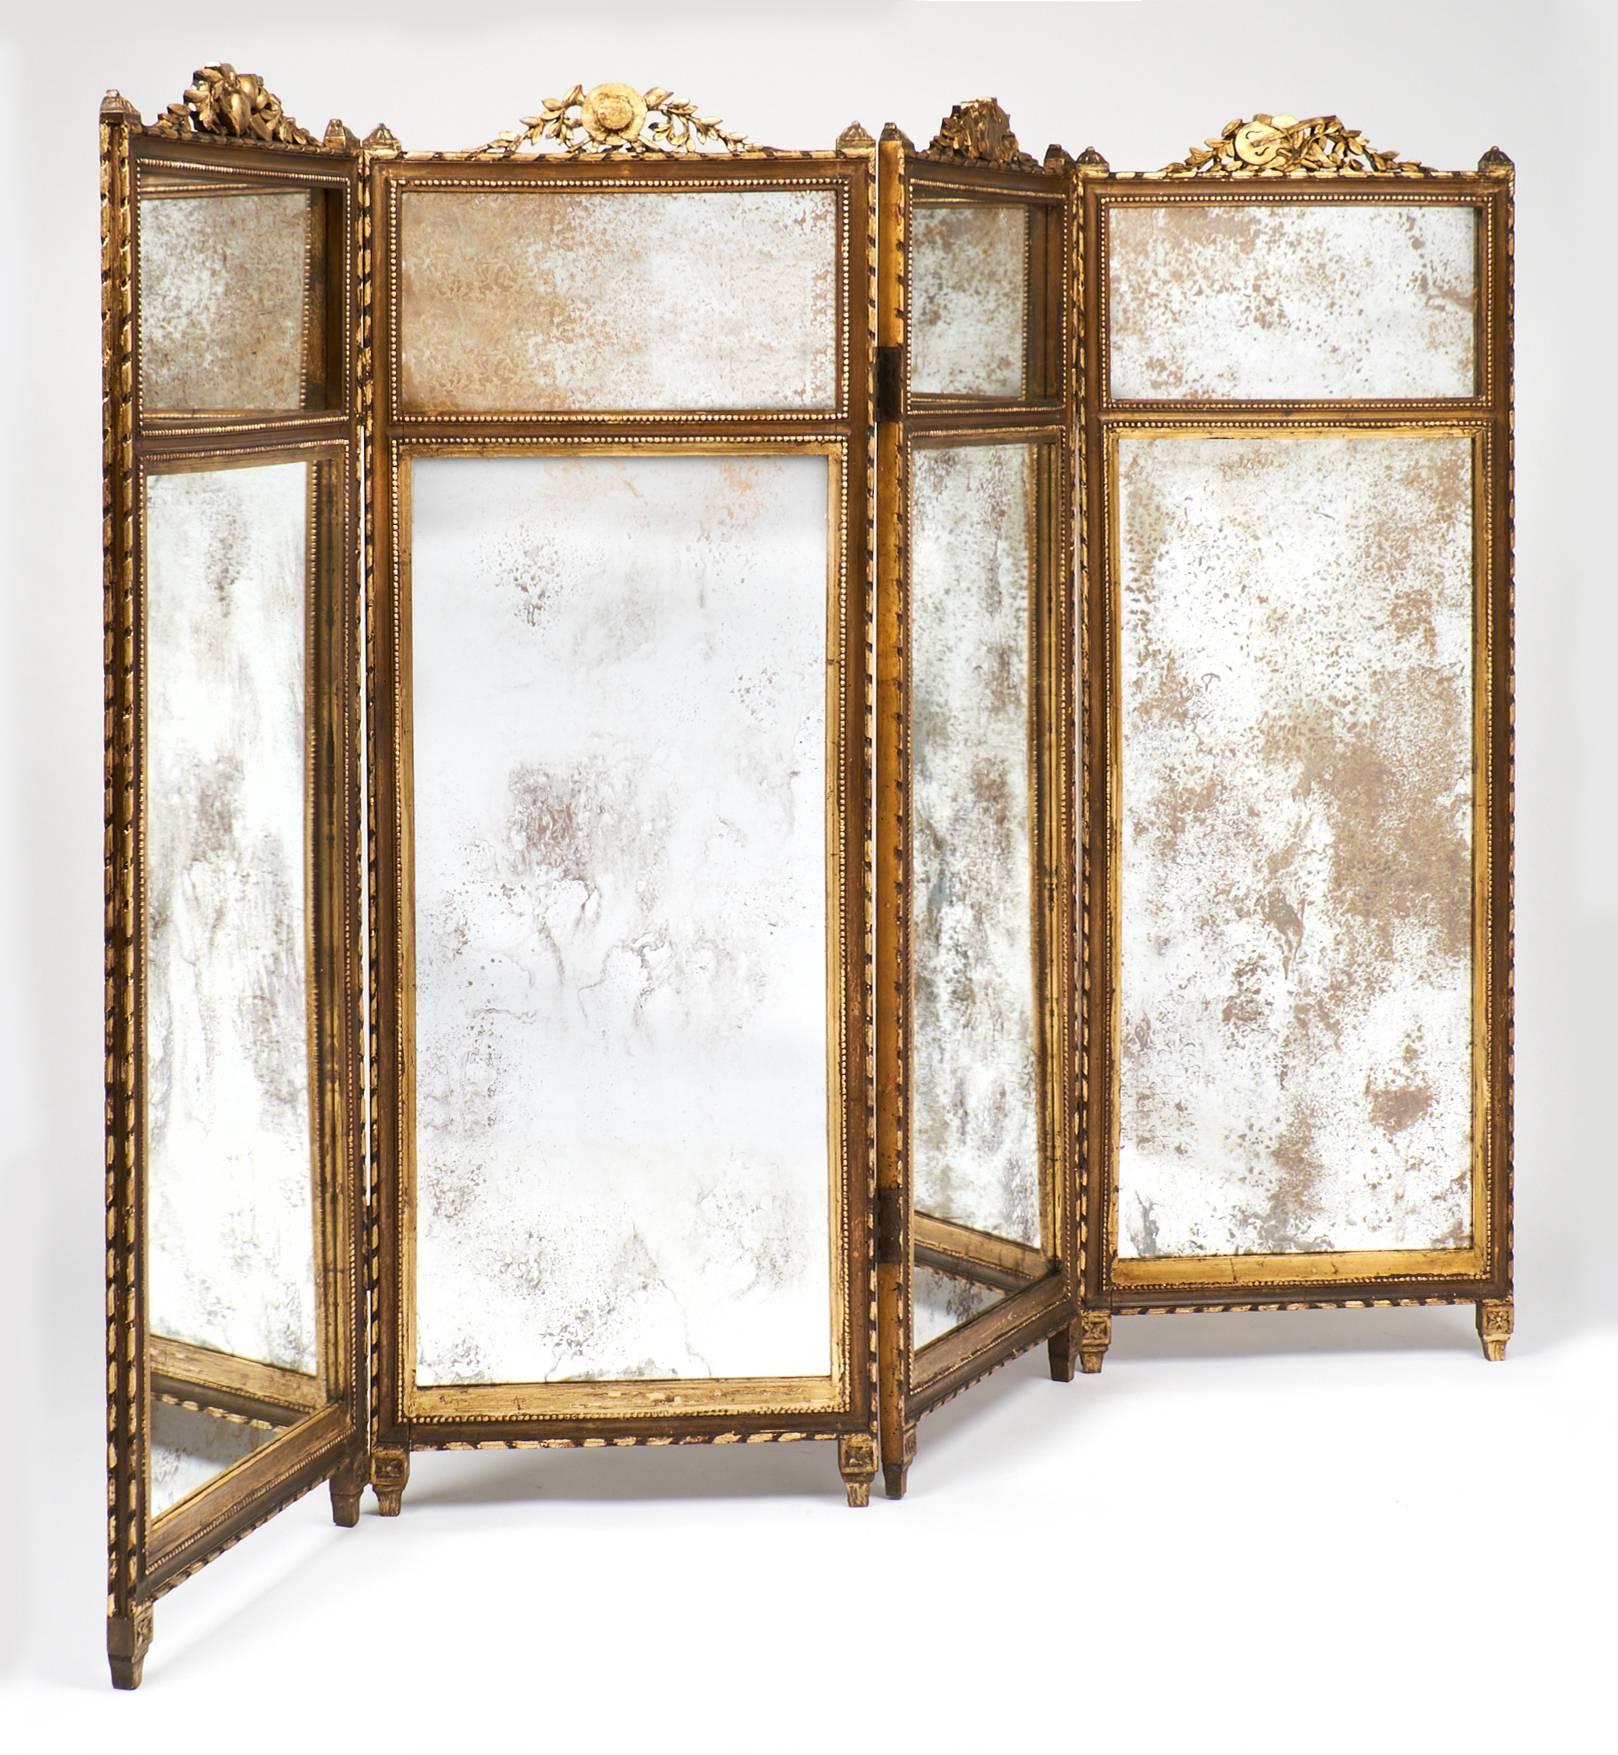 Antique French Louis XVI style folding screen or room divider in four panels of gilded fir with antiqued mirrored glass. Exquisite detailing includes beading around each mirror, and frontons of artistic endeavours surrounded by leaves.